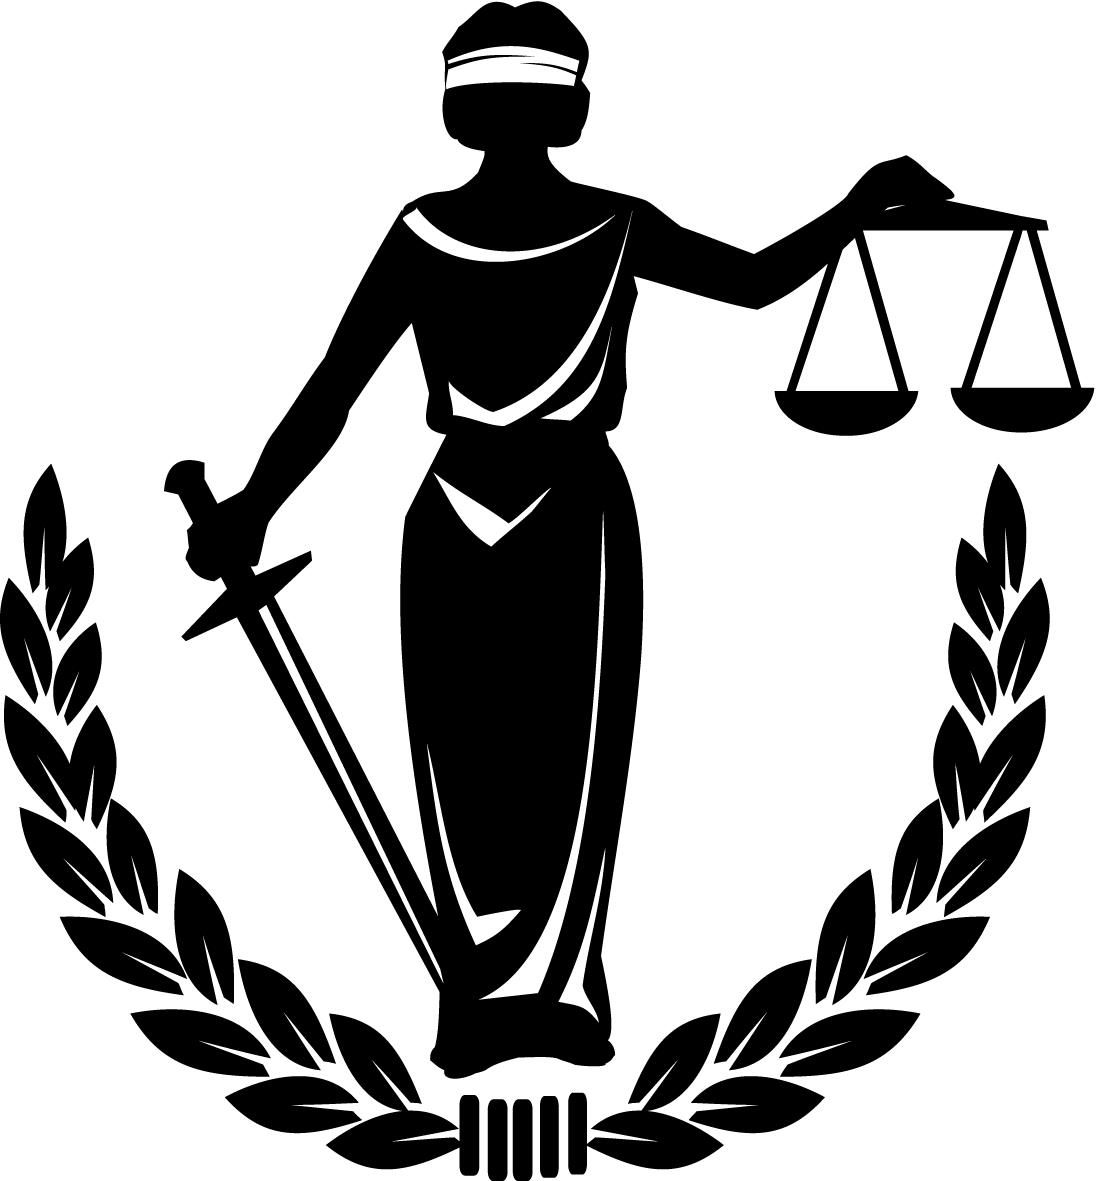 justice-scales.png